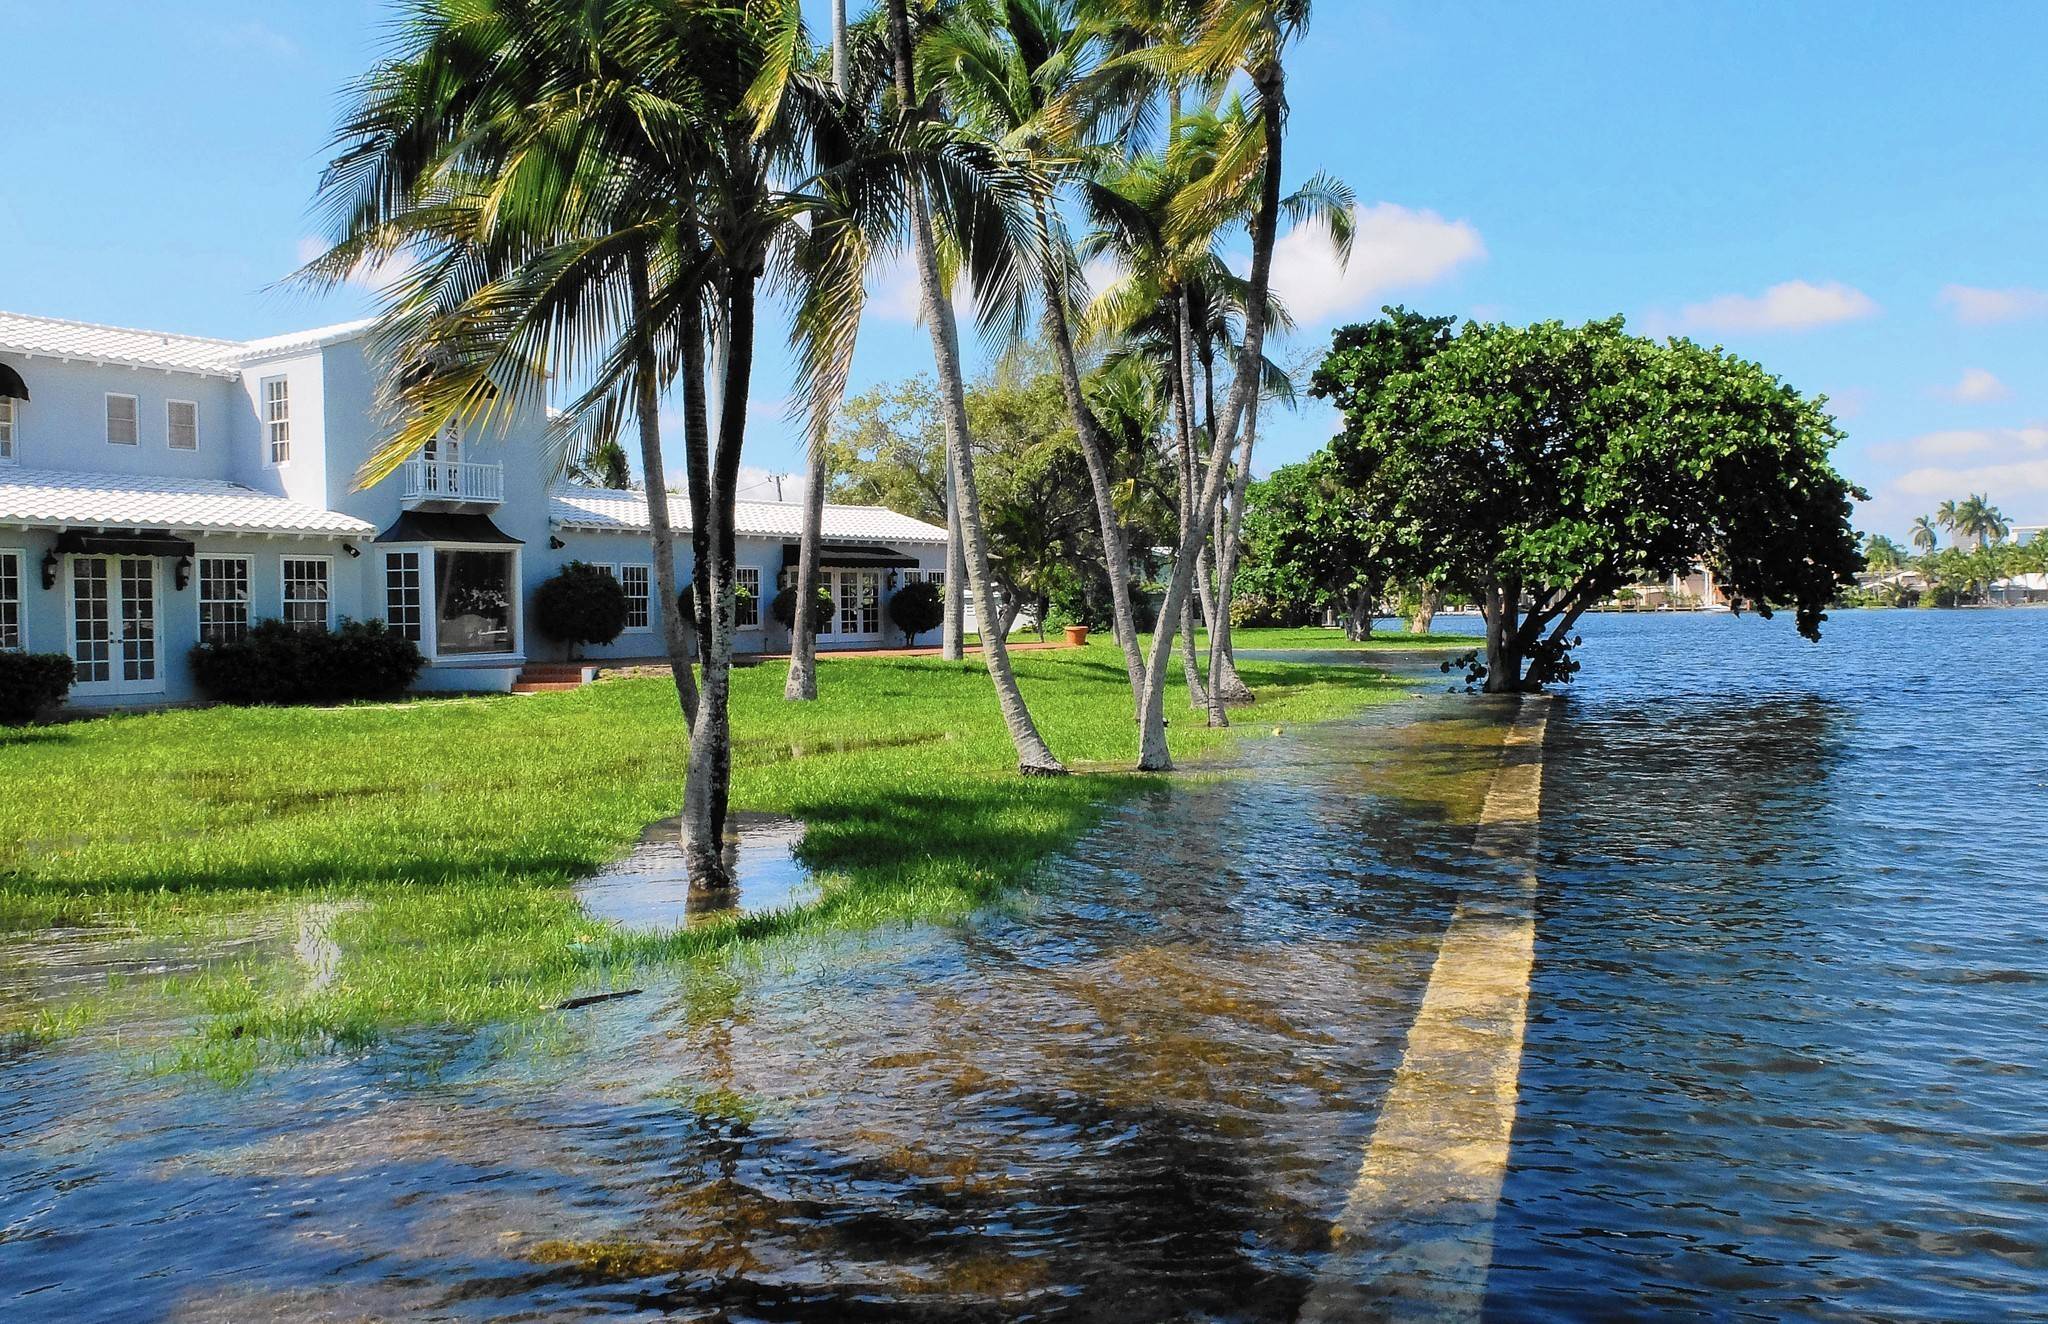 Technology to Mitigate Risks From Sea-Level Rise and Flooding